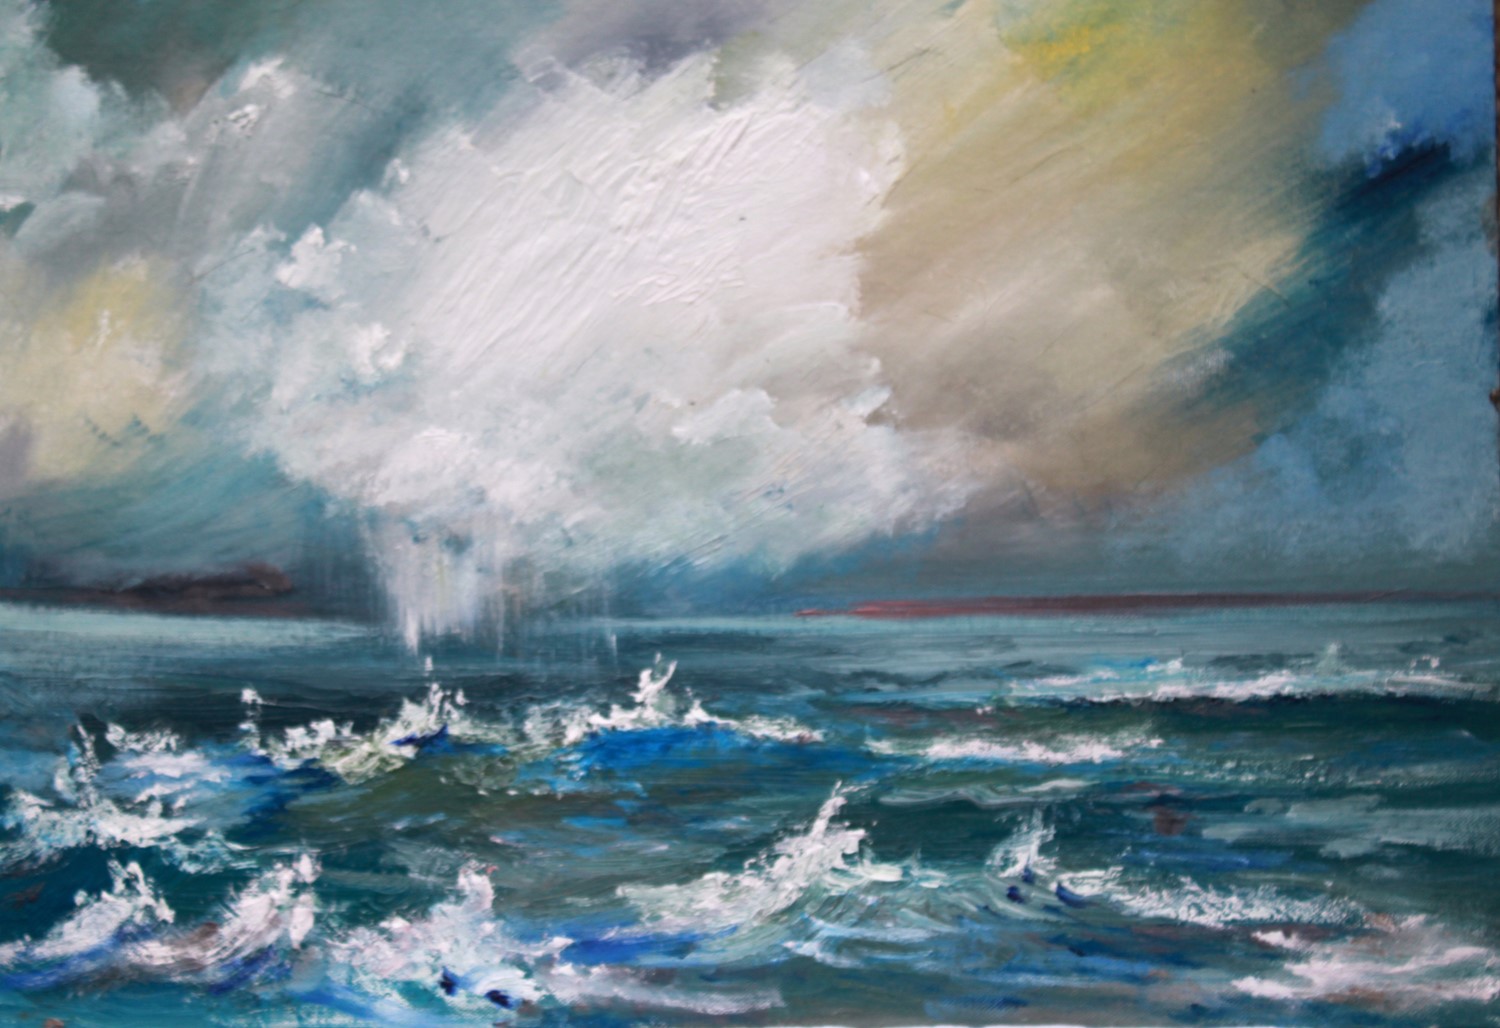 'Blustery Waves' by artist Rosanne Barr